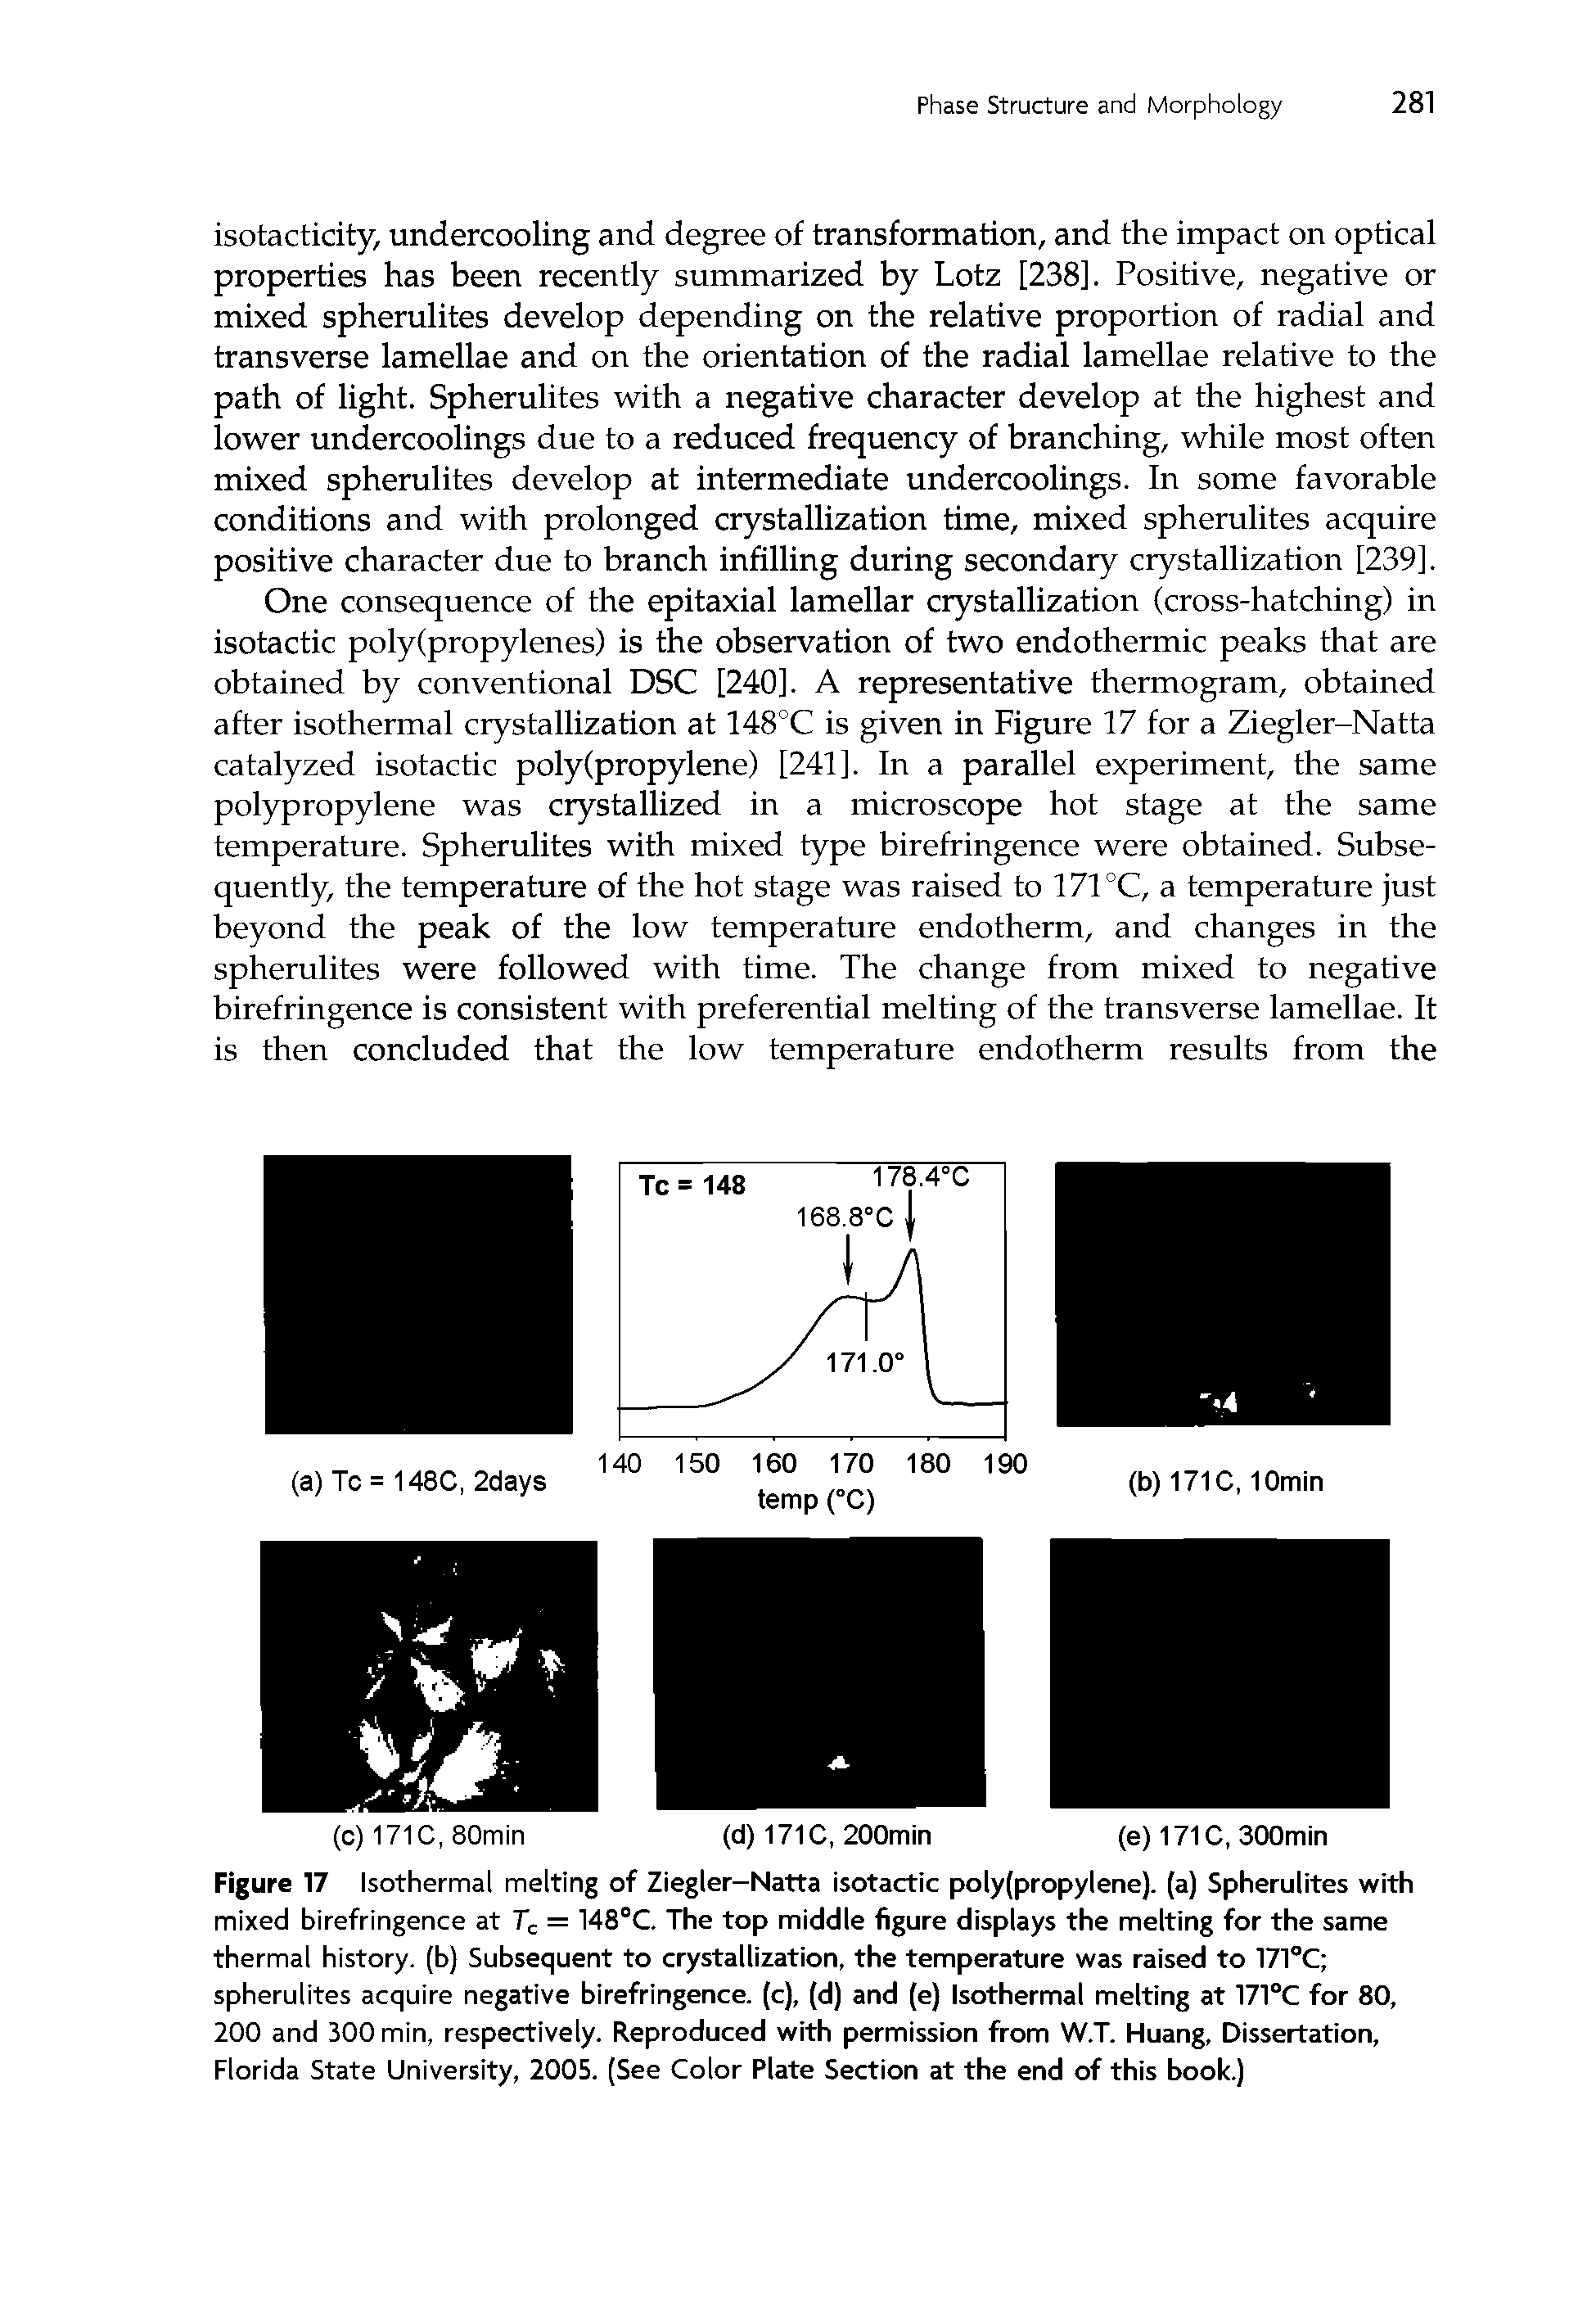 Figure 17 Isothermal melting of Ziegler-Natta isotactic poly(propylene). (a) Spherulites with mixed birefringence at Tc = 148°C. The top middle figure displays the melting for the same thermal history, (b) Subsequent to crystallization, the temperature was raised to 171°C spherulites acquire negative birefringence, (c), (d) and (e) Isothermal melting at 171°C for 80, 200 and 300 min, respectively. Reproduced with permission from W.T. Huang, Dissertation, Florida State University, 2005. (See Color Plate Section at the end of this book.)...